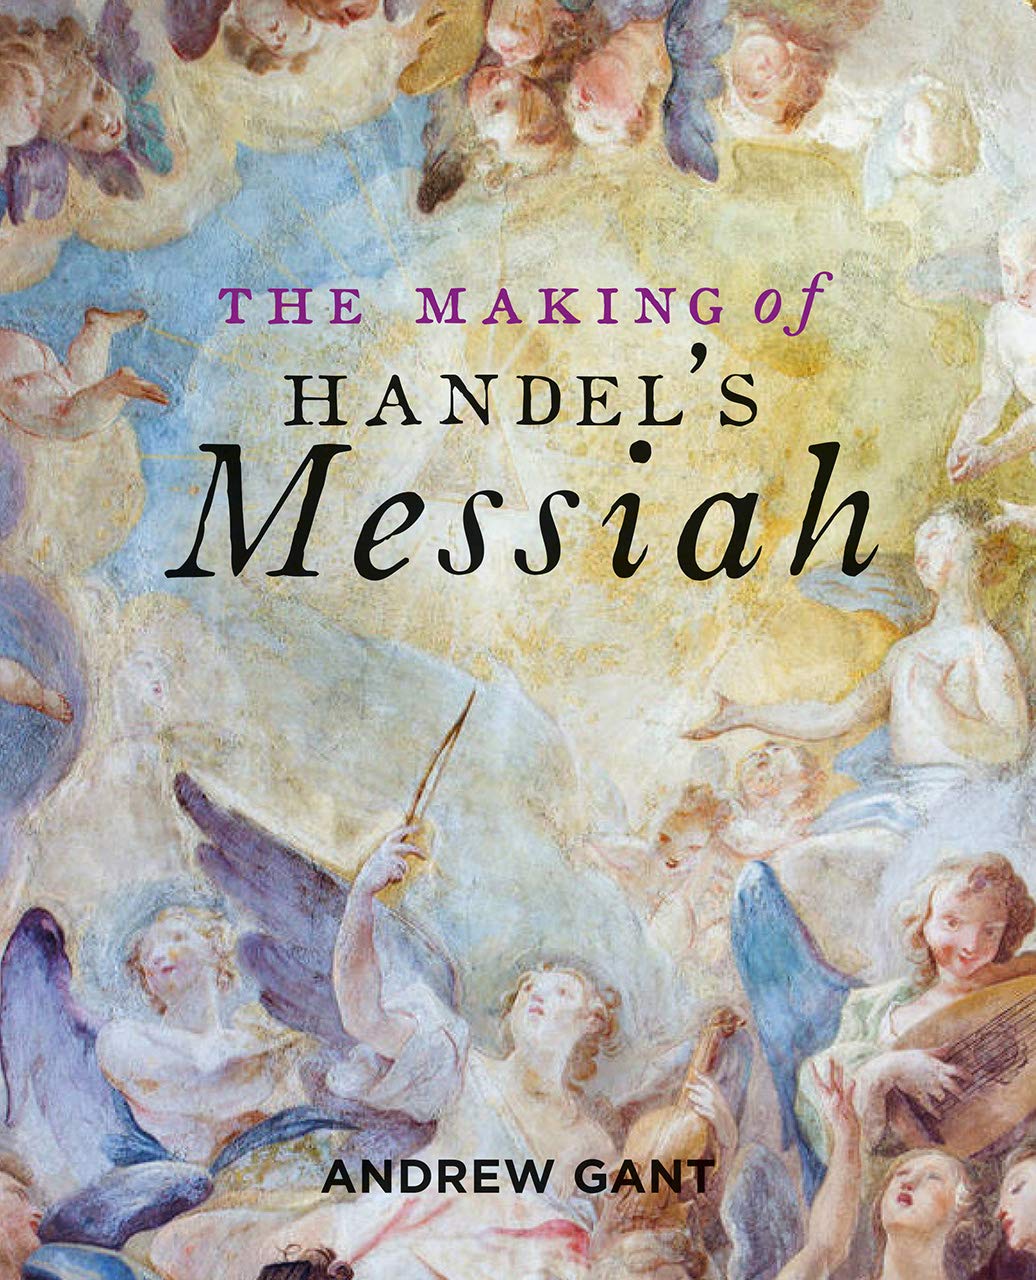 Book Review: The Making of Handel’s Messiah